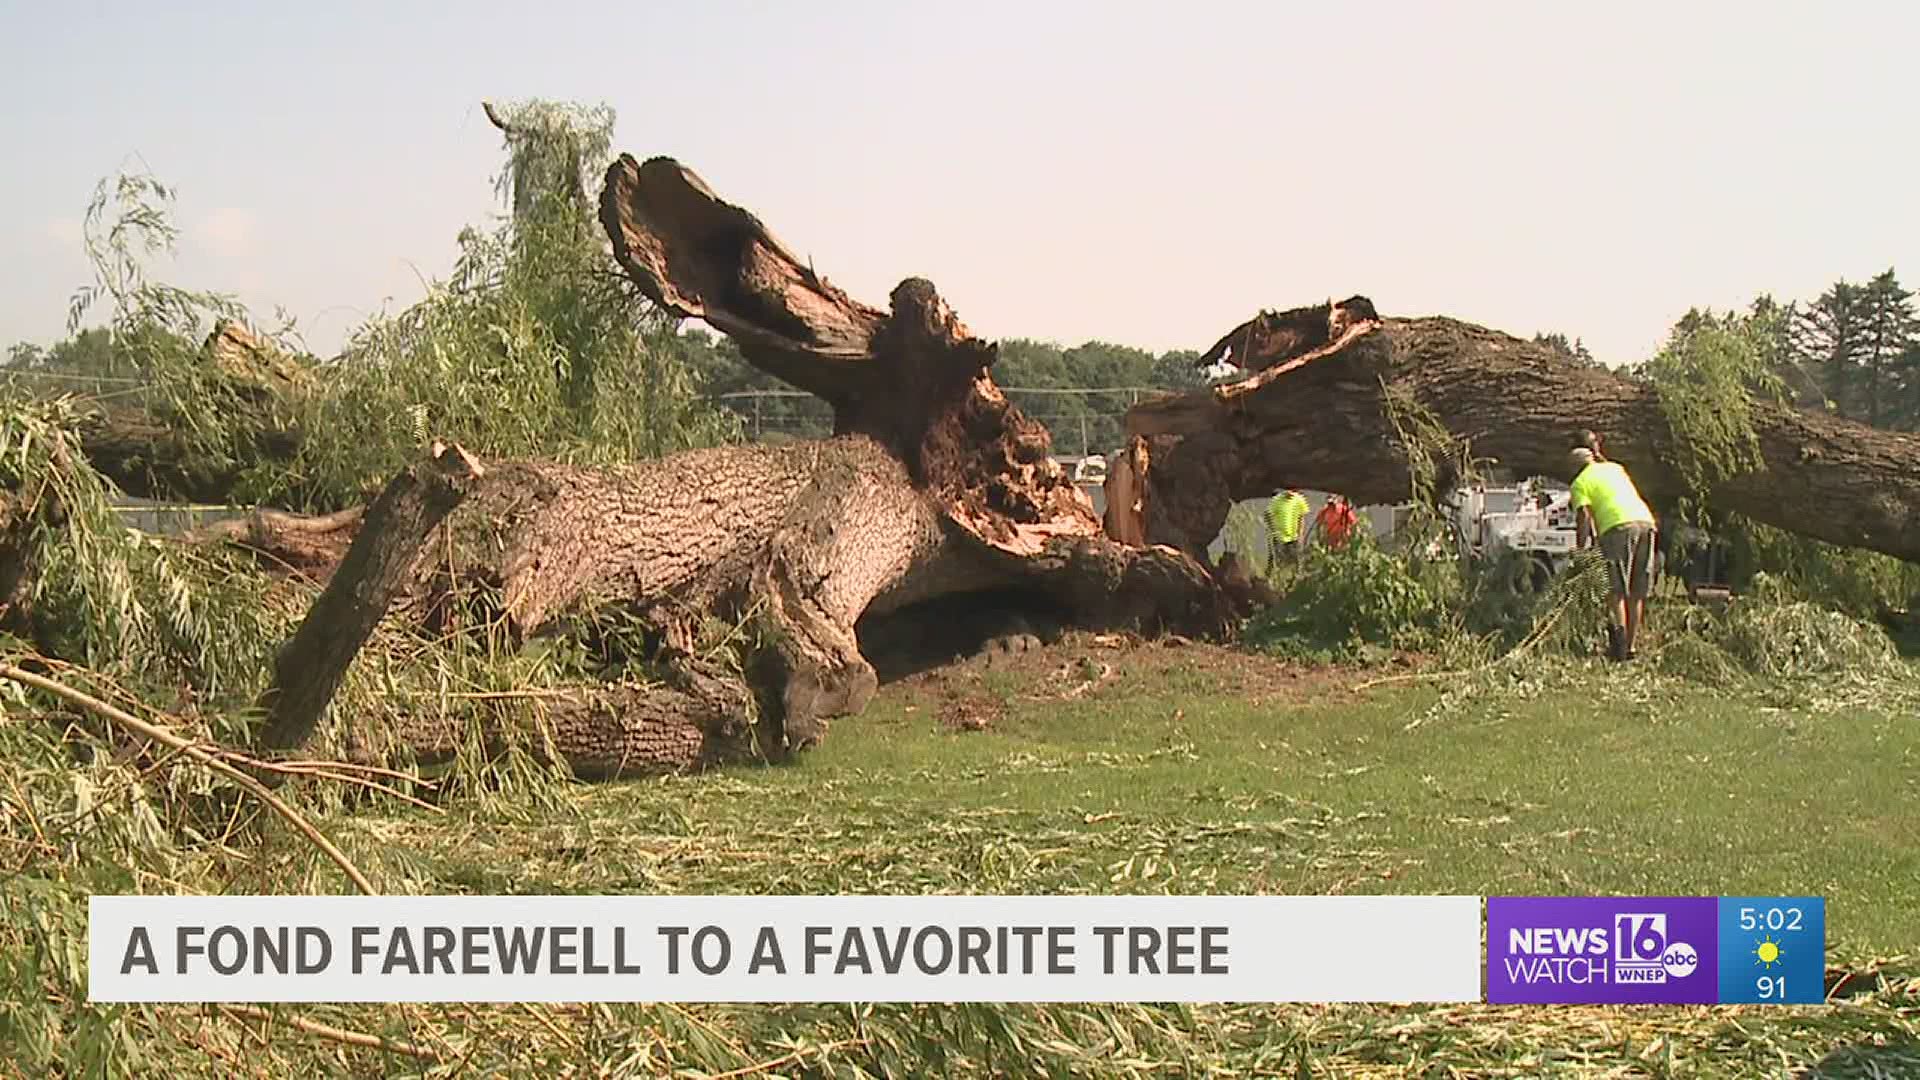 Stormy weather in part of Luzerne County Tuesday took one neighborhood's favorite tree along with it. Newswatch 16's Chelsea Strub shows us the damage.